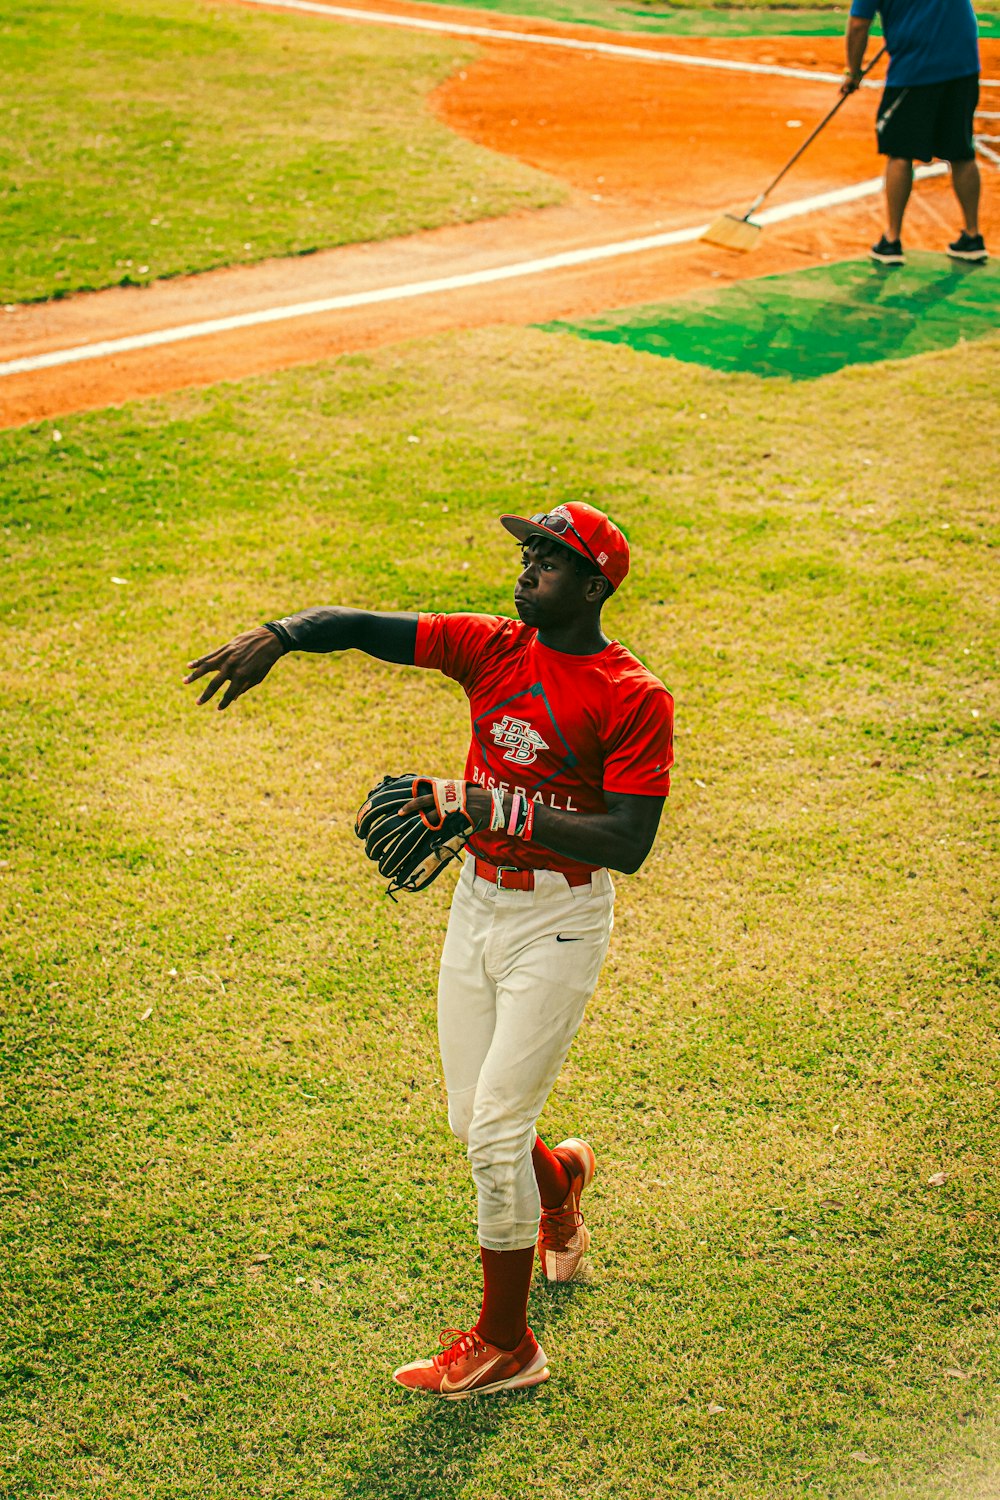 a baseball player throwing a ball on a field